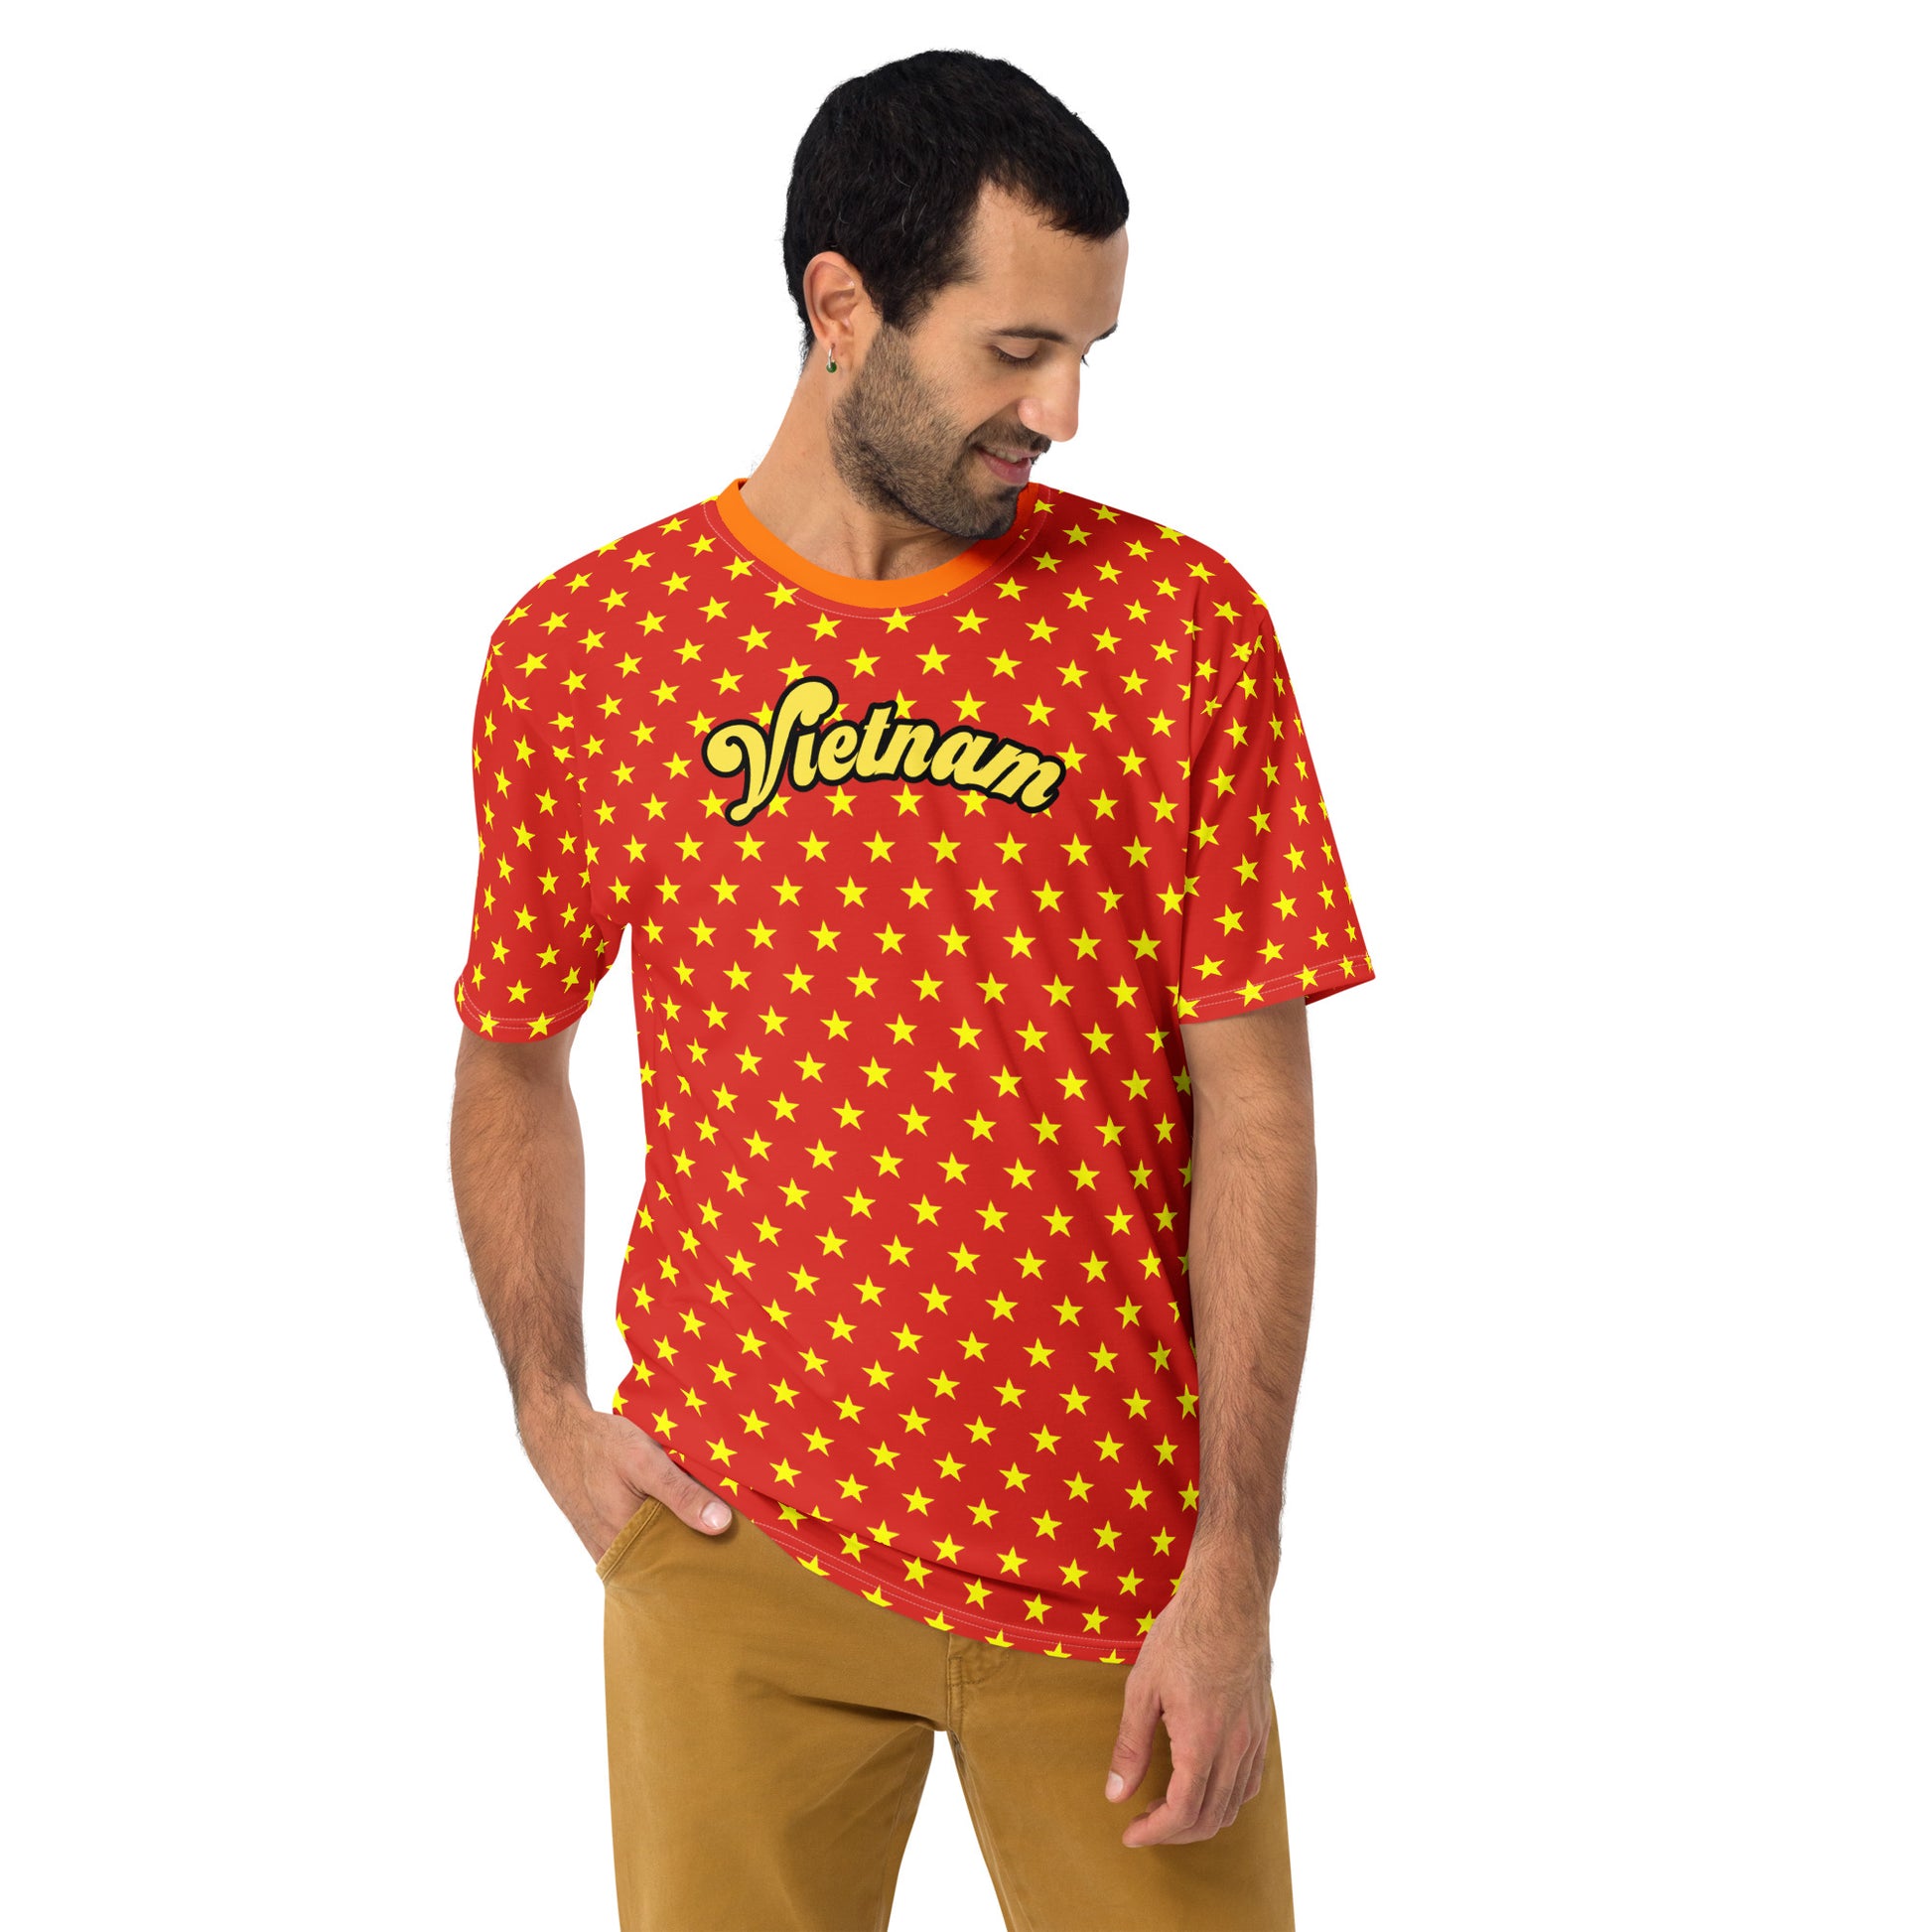  Unique T-Shirt for Men: Yellow Polka Dots with Vietnam Theme